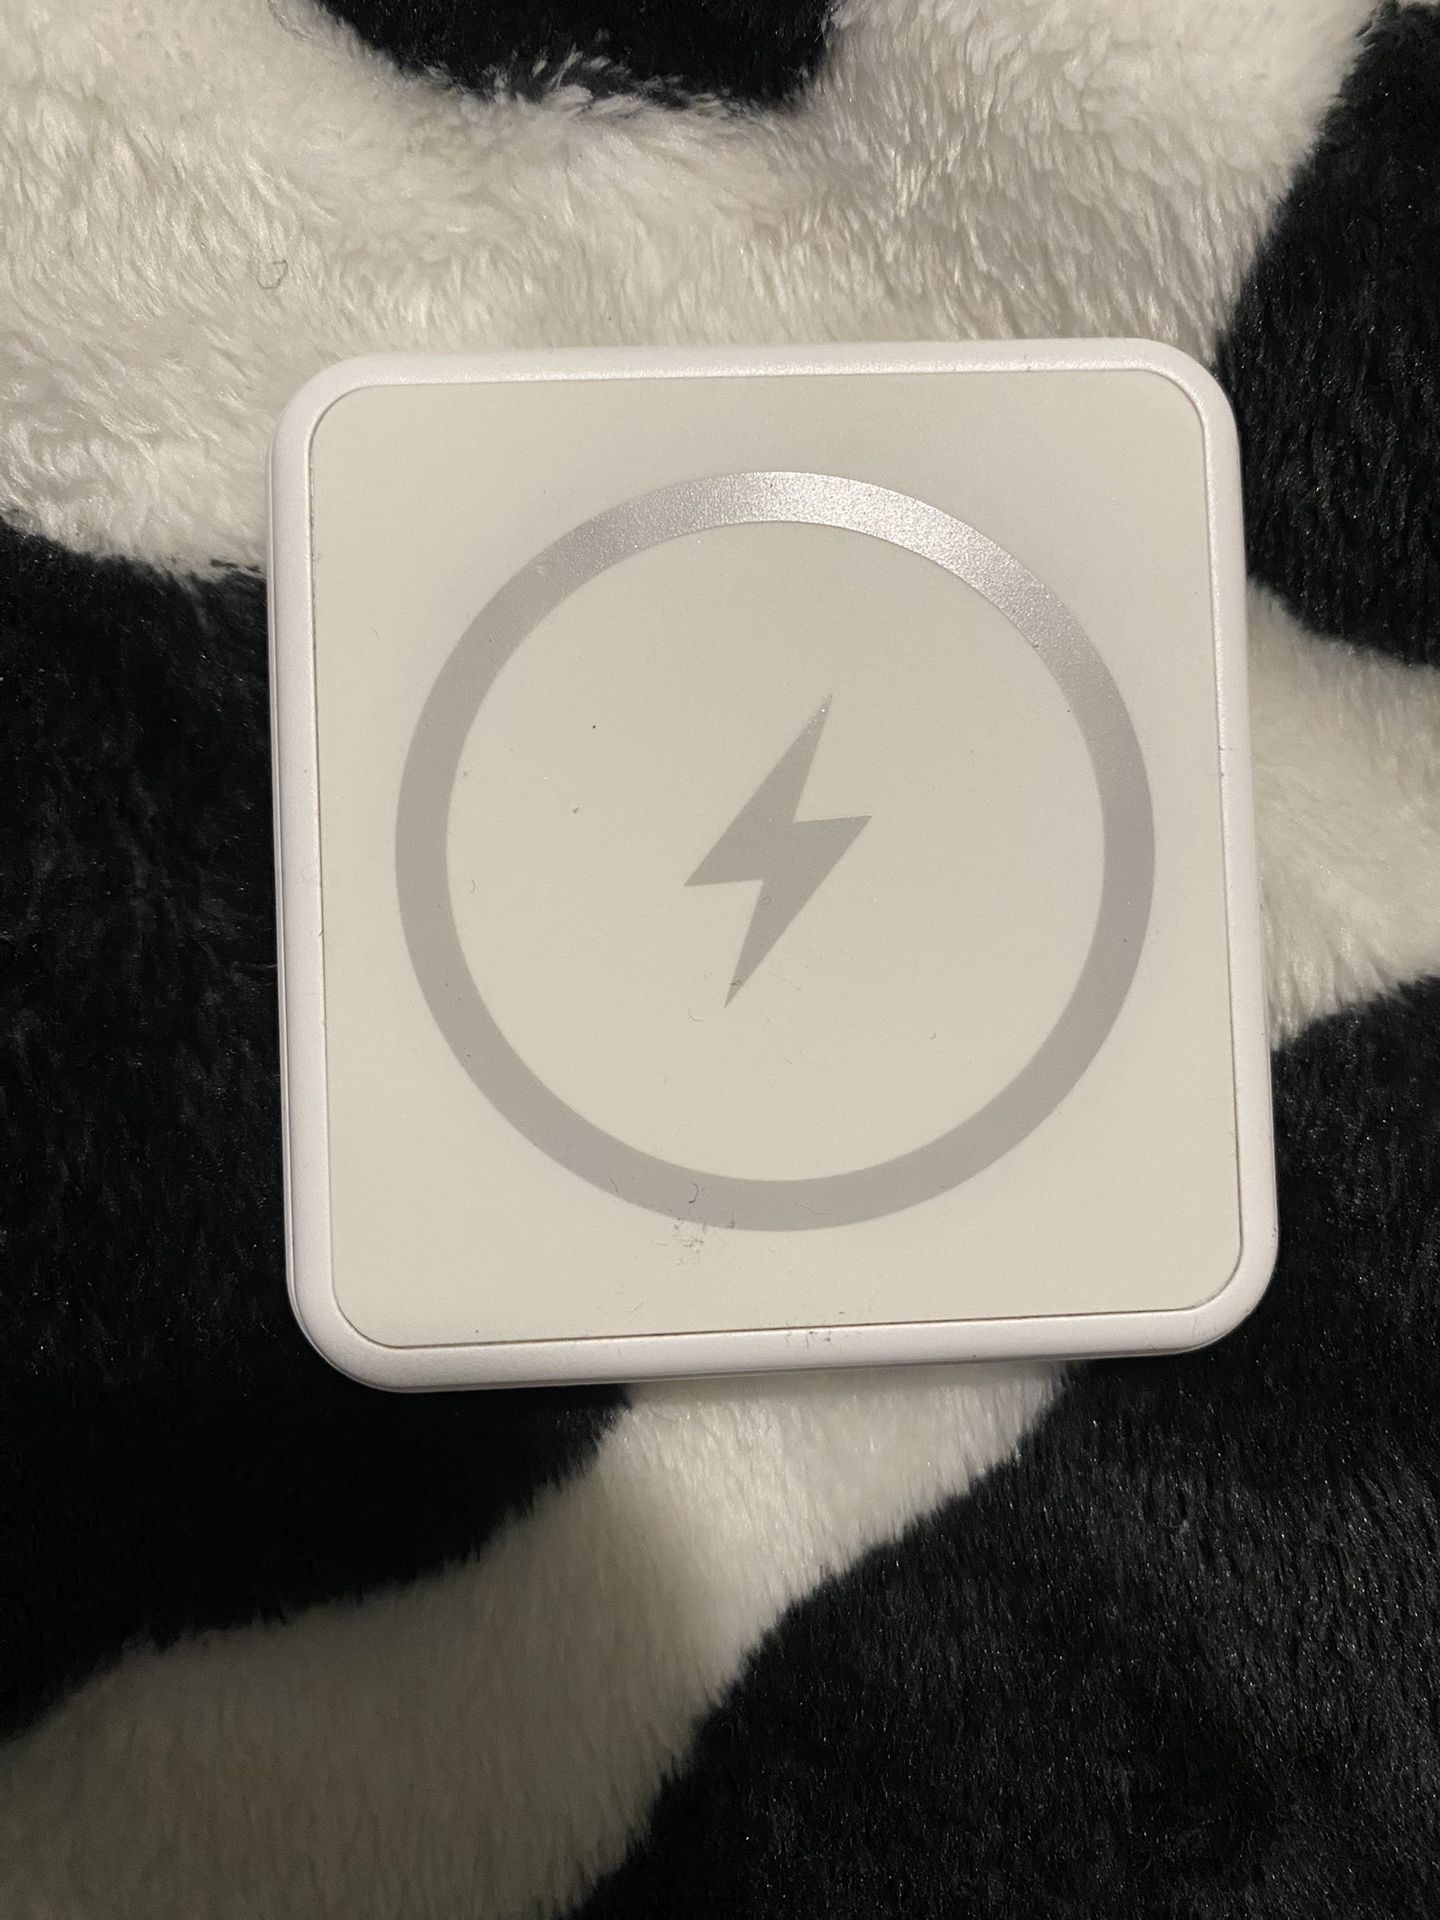 MagSafe charger